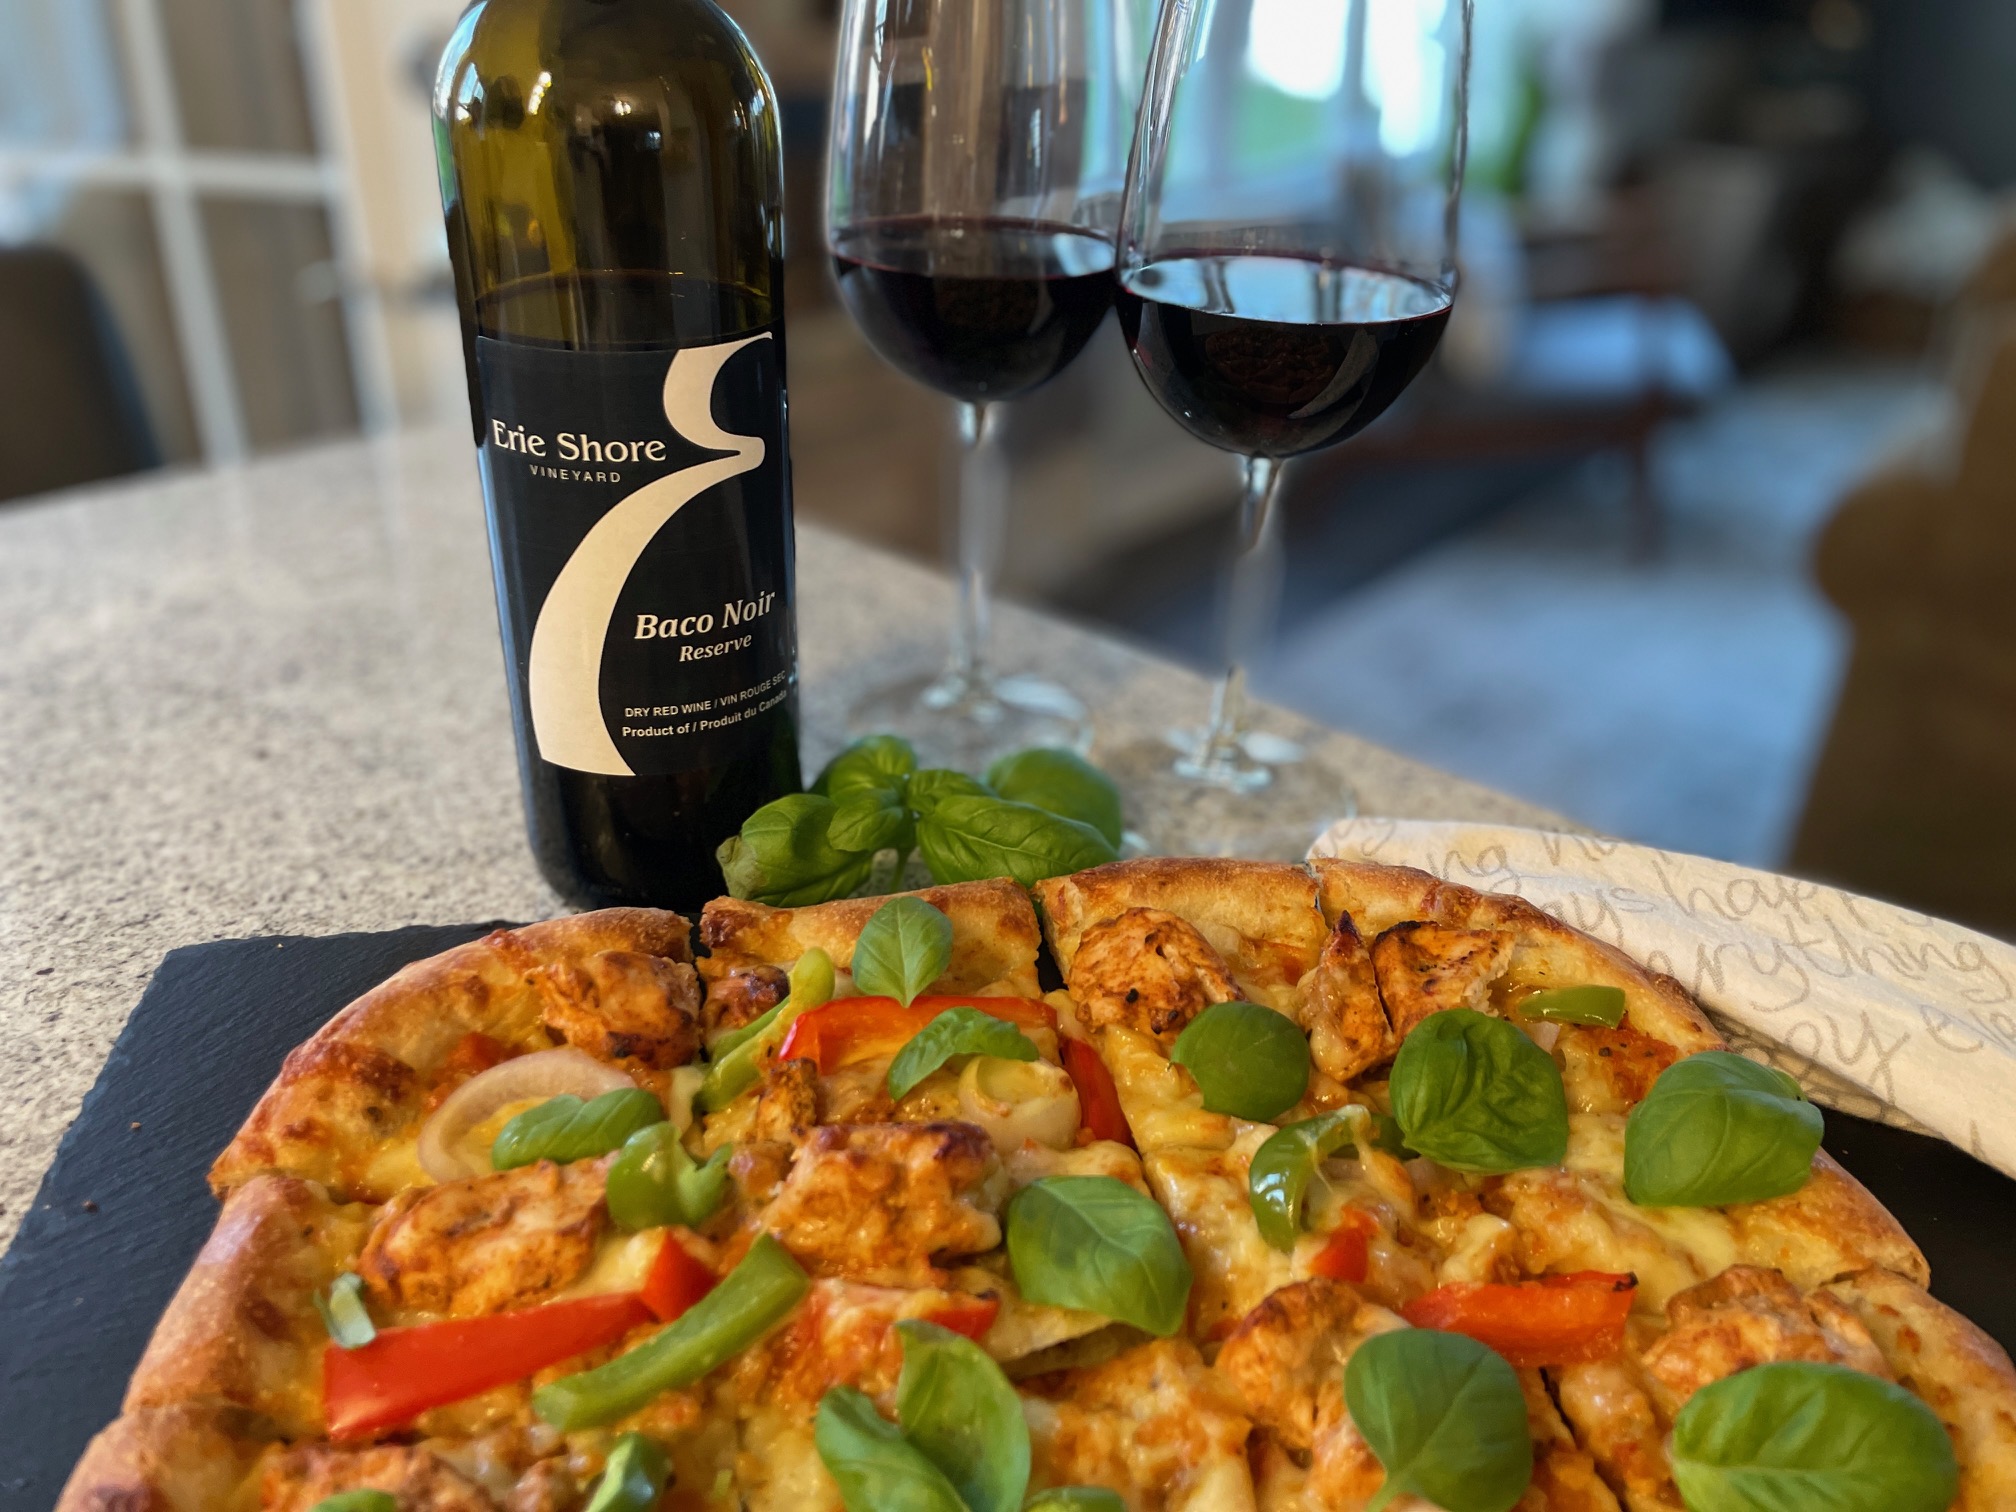 Featured image for “Erie Shore Baco Noir Reserve with Tandoori Chicken Pizza”